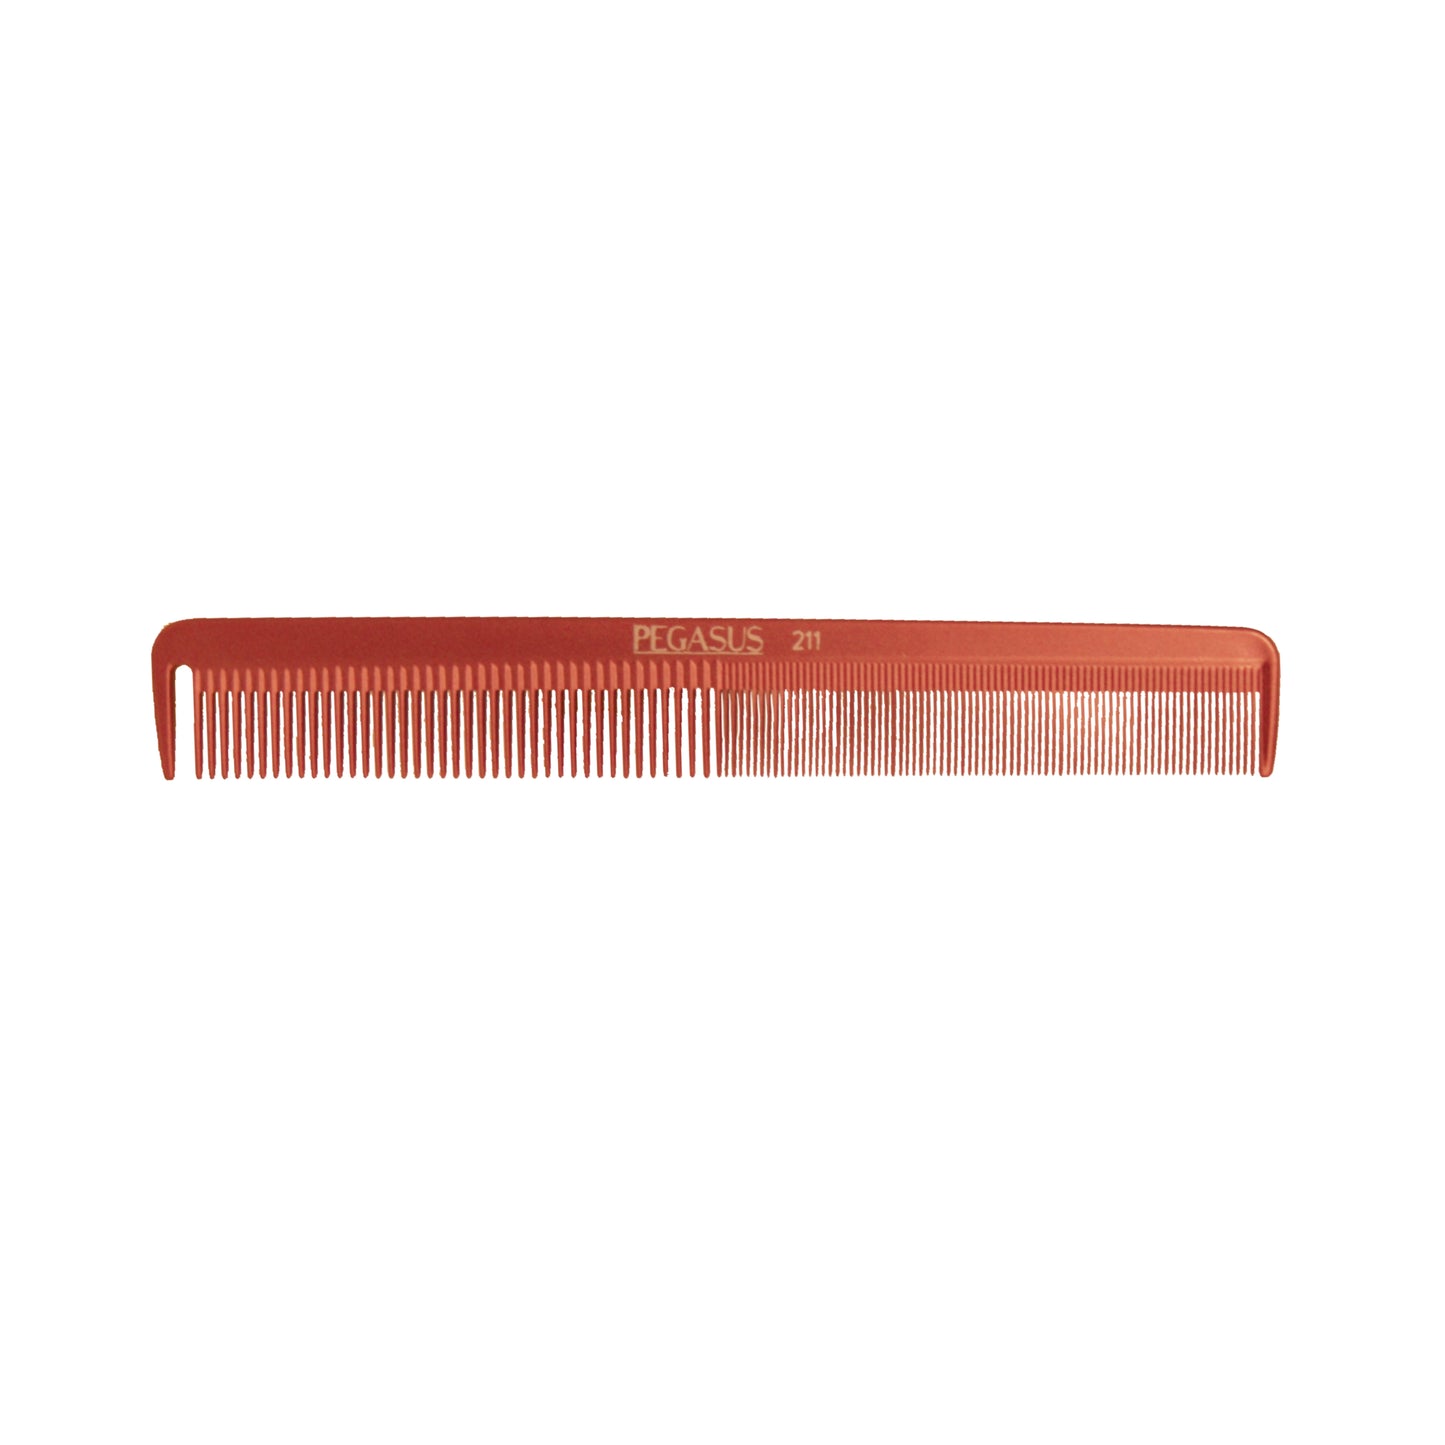 Pegasus MICOLOR 211, 9in Hard Rubber Cutting Comb With Sectioning Tooth, Anti Static, Heat and Chemically Resistant, Wet Hair, Everyday Grooming Comb | Peines de goma dura - Copper